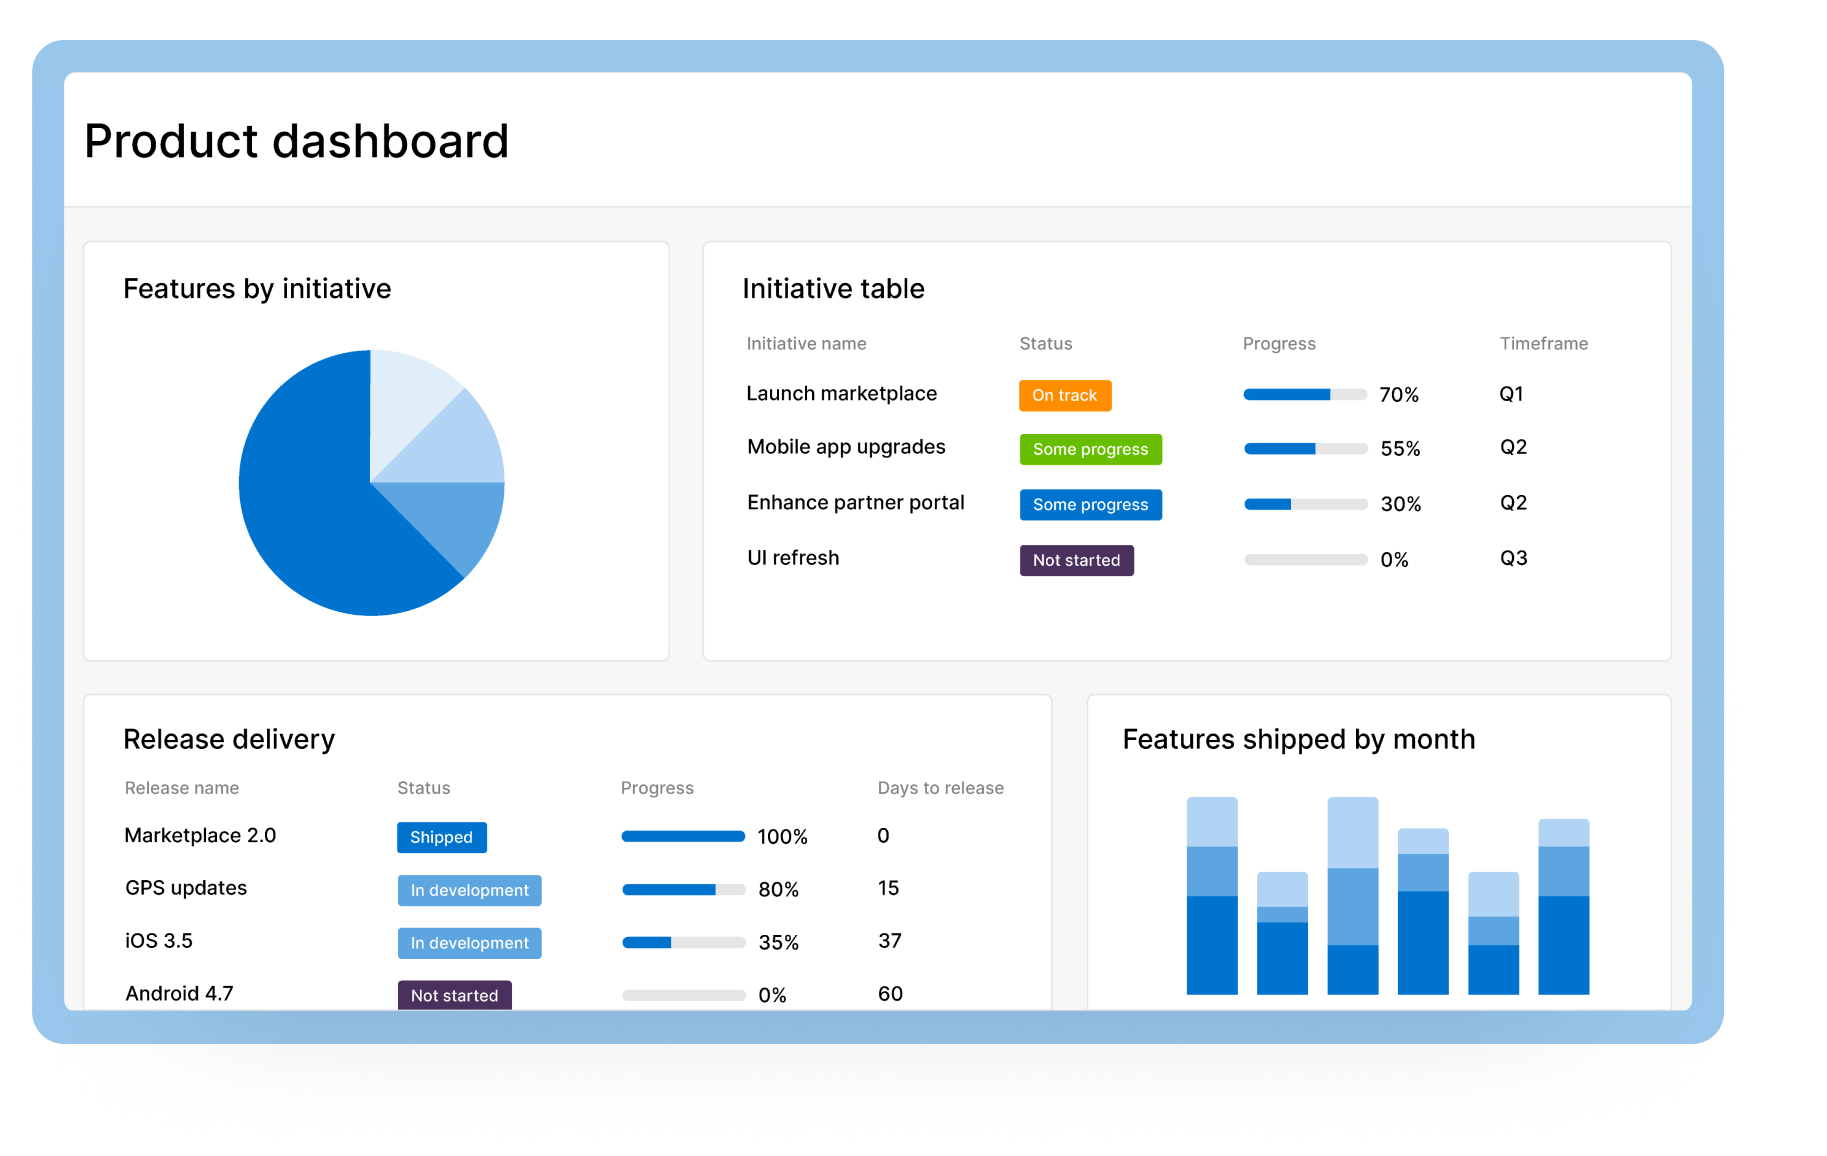 Highlight your success - Product dashboard